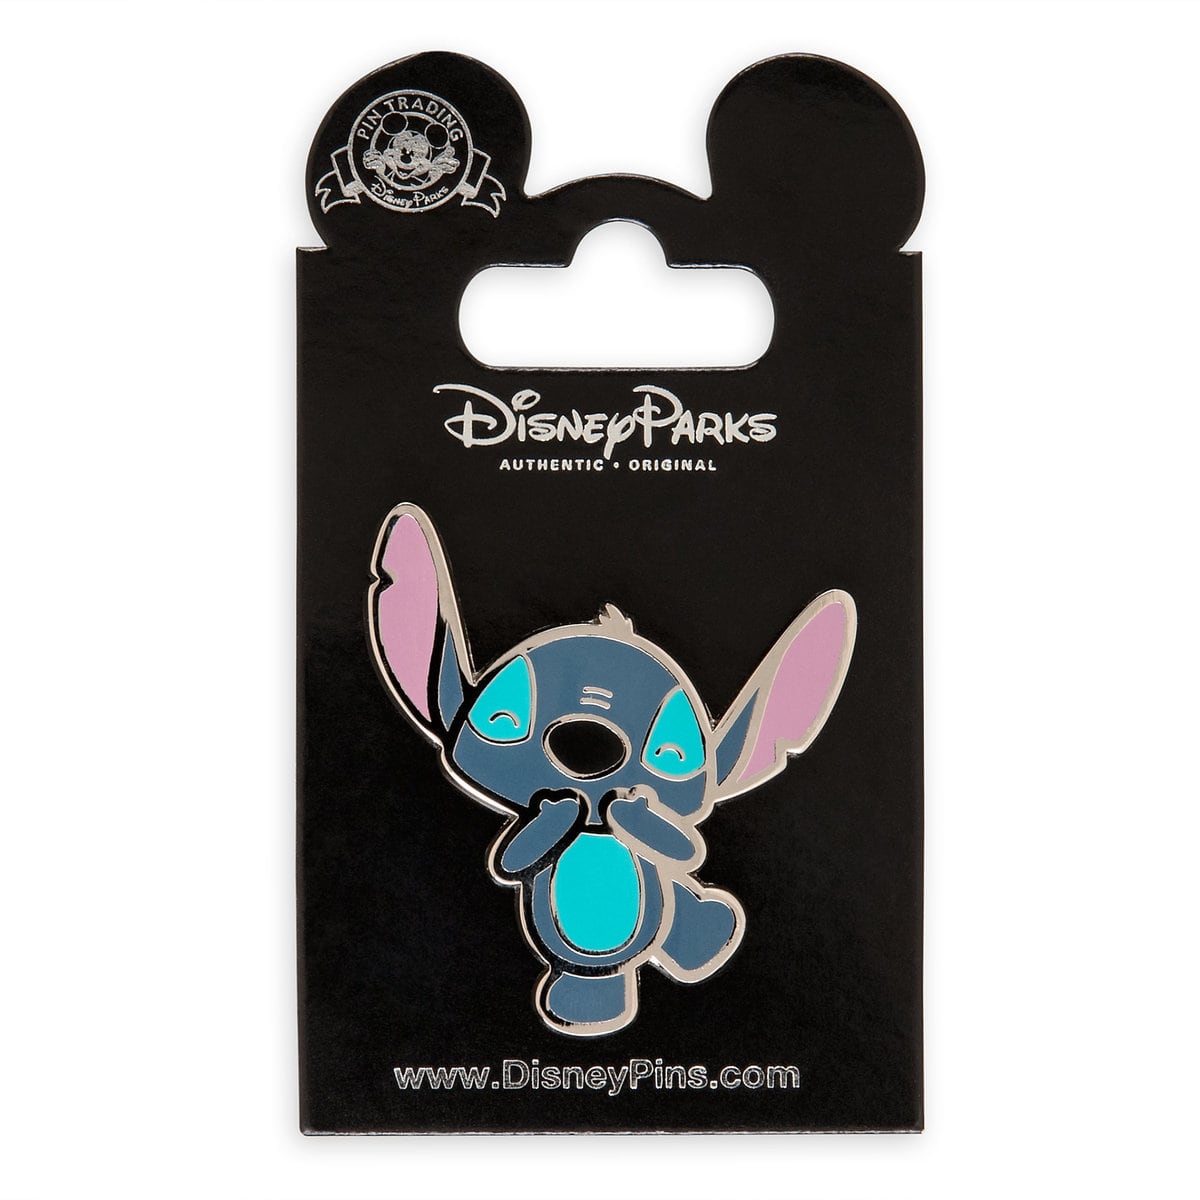 Disney Parks Stitch Cuties Pin New with Card